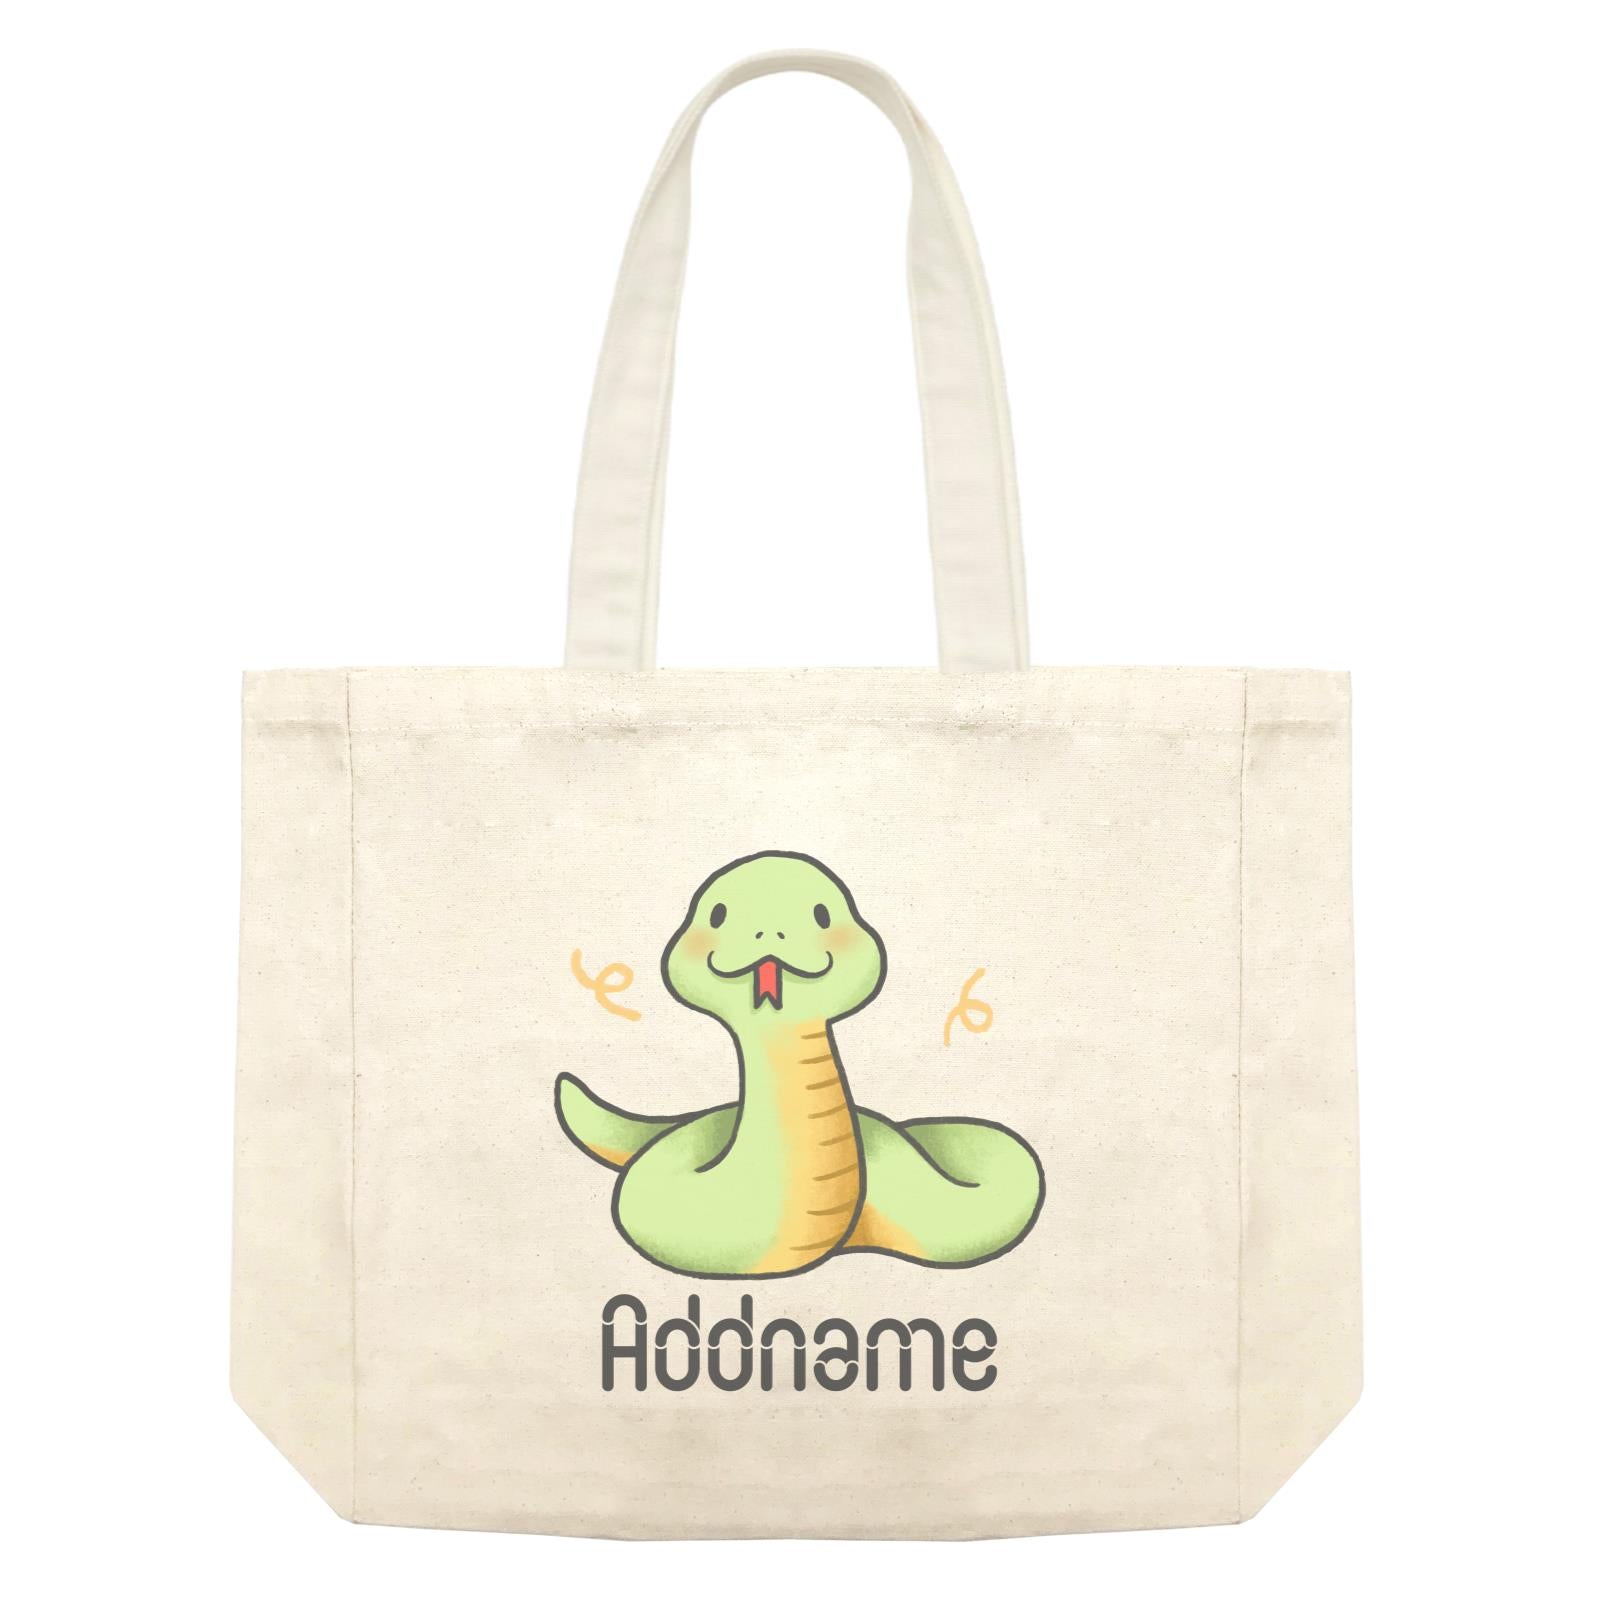 Cute Hand Drawn Style Snake Addname Shopping Bag